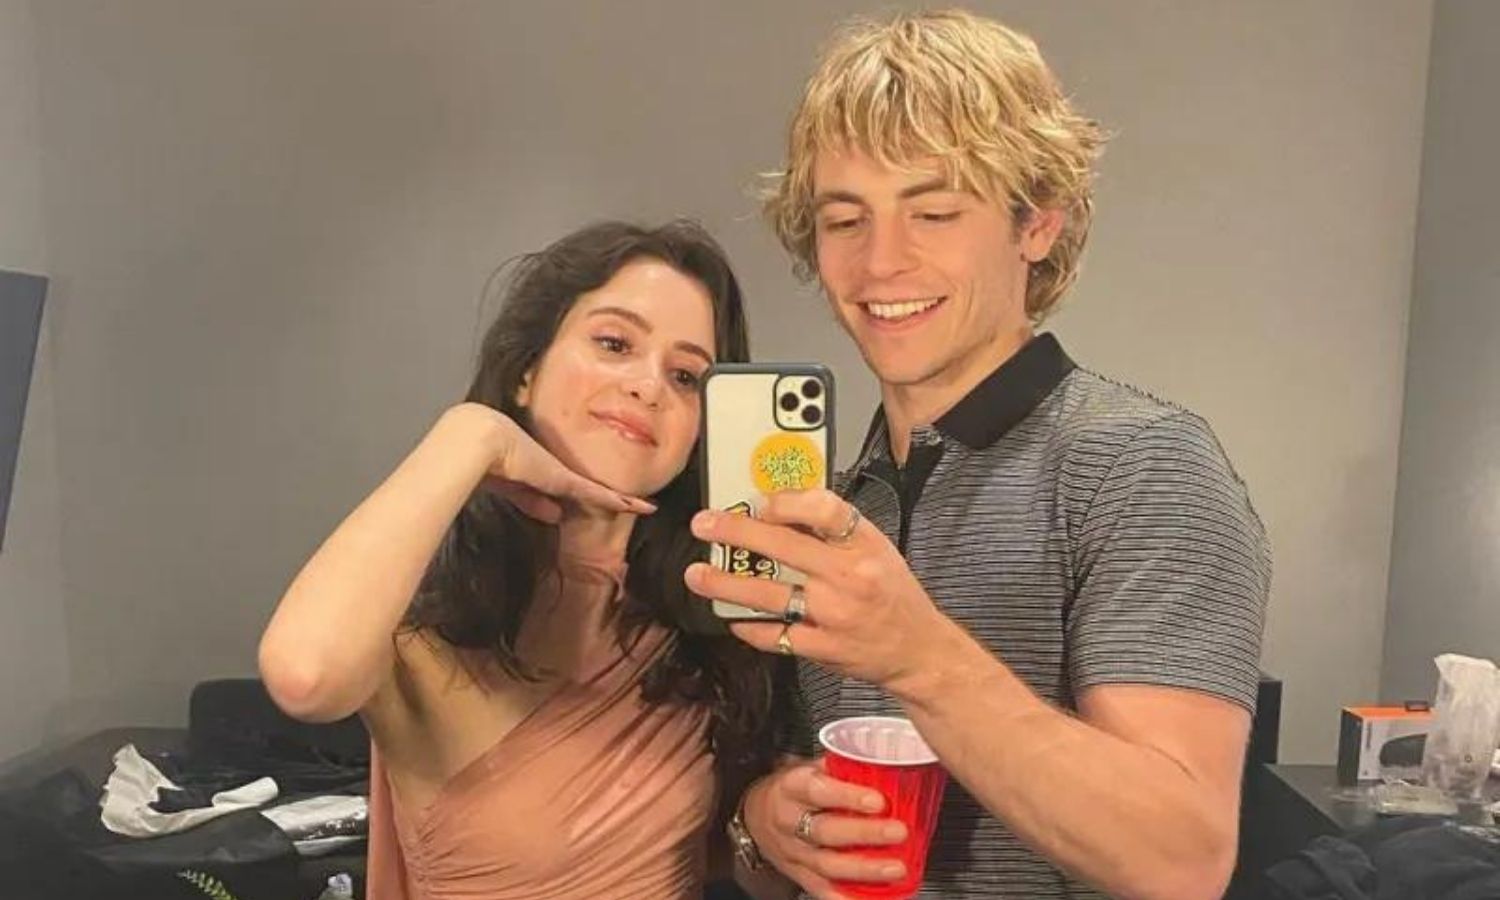 Ross Lynch along with his co-star from Austin and Ally